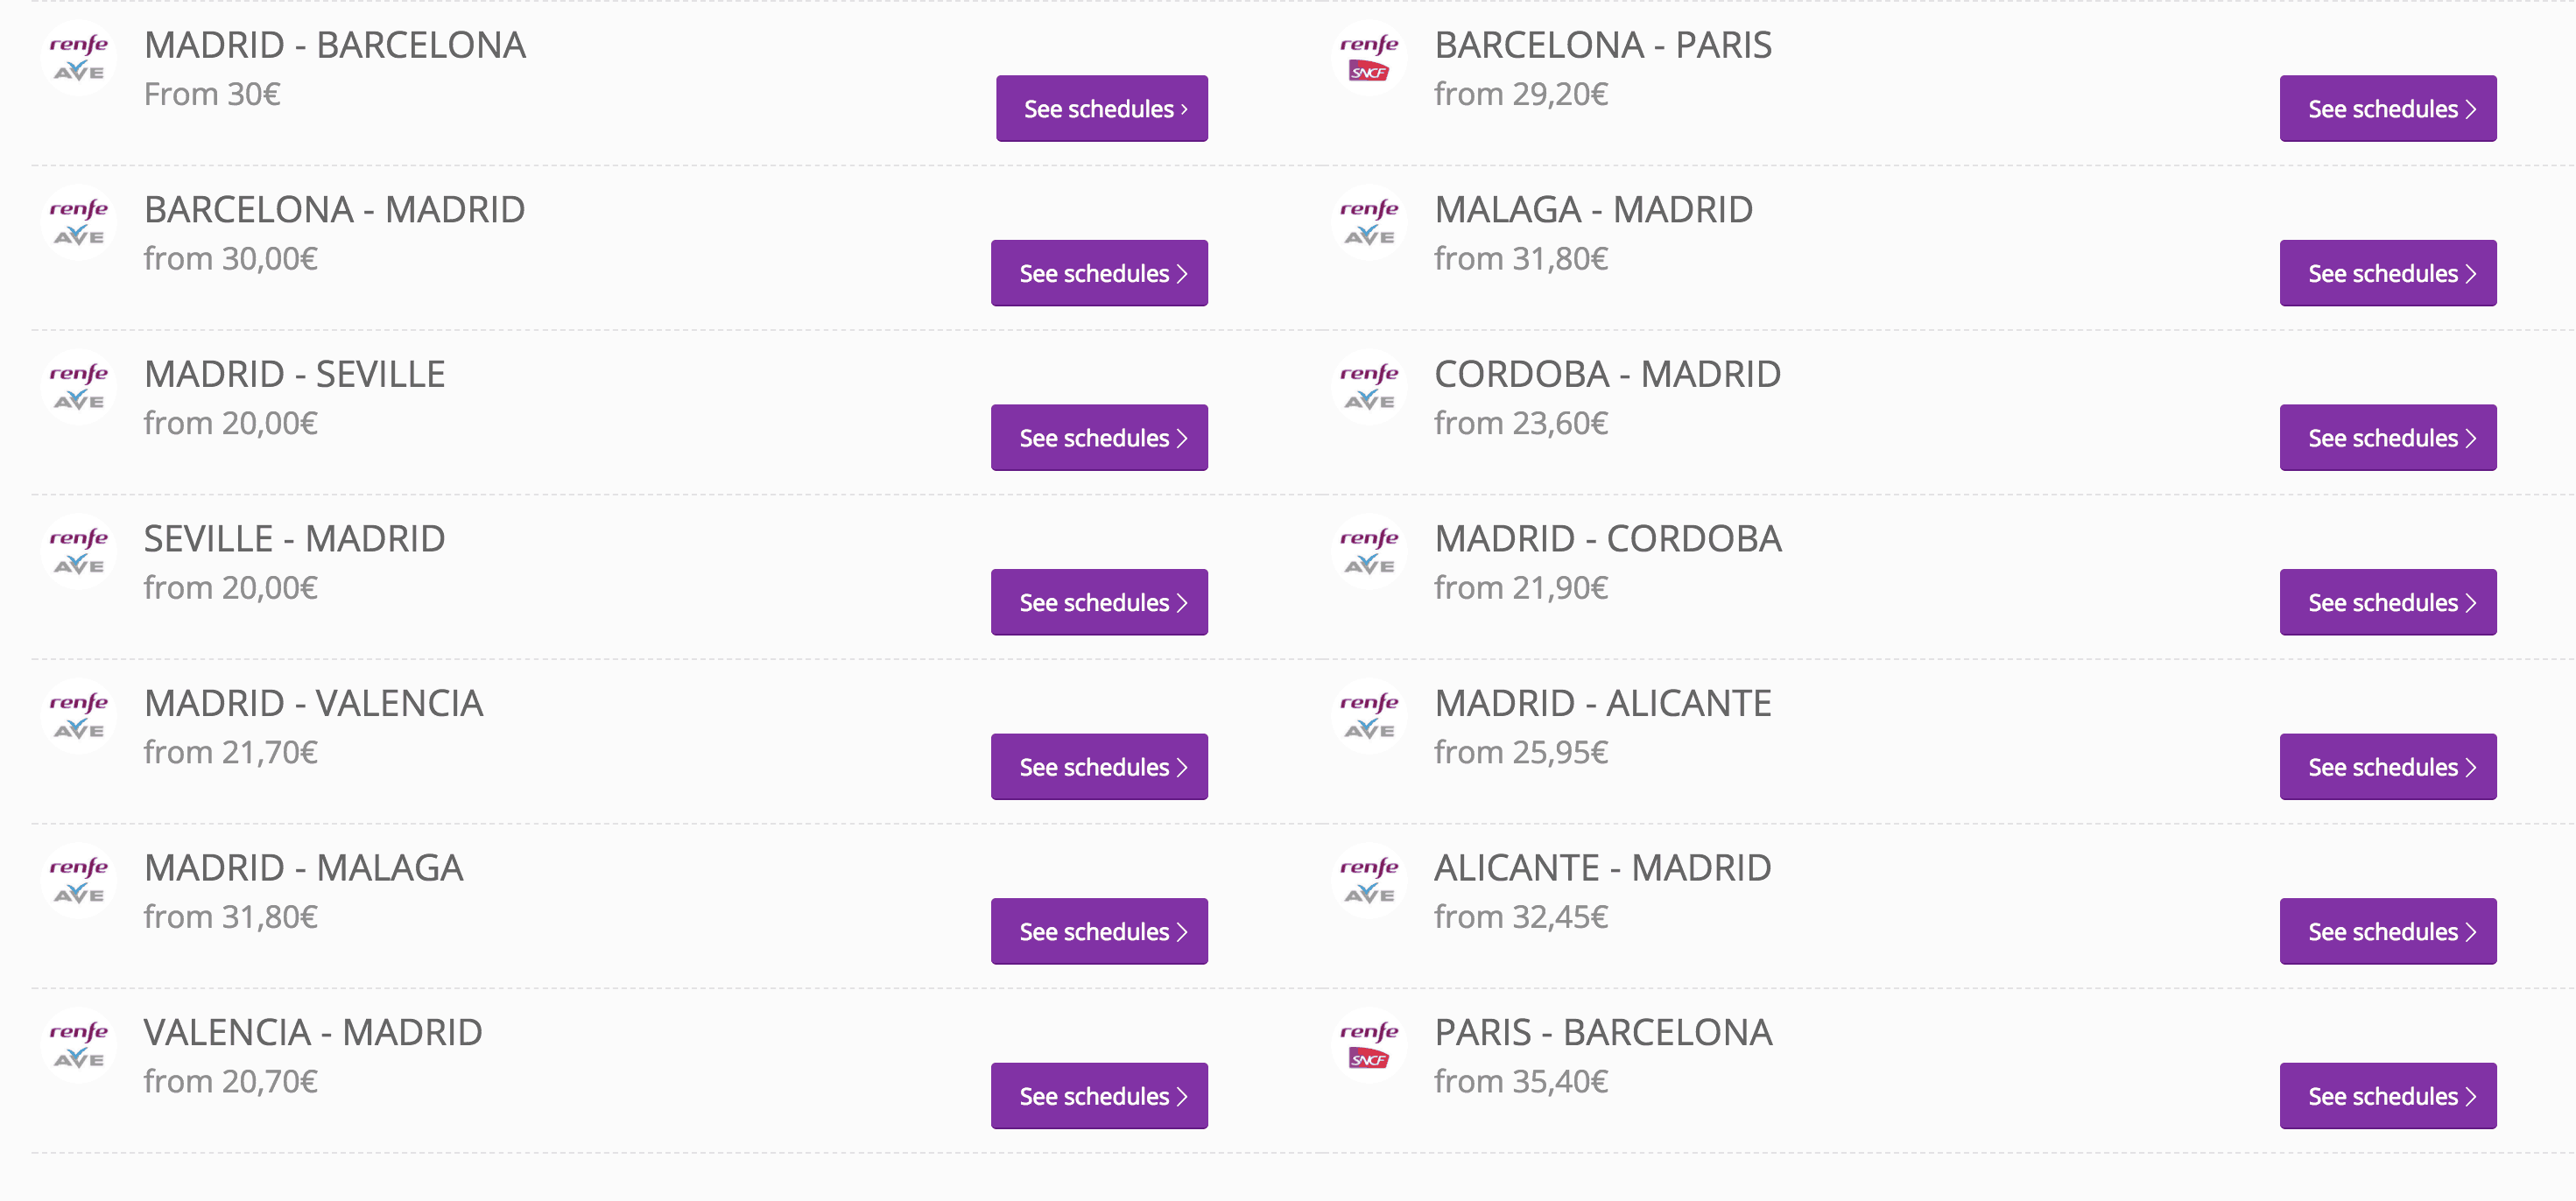 A list of train routes and prices in Spain for the Renfe AVE service.